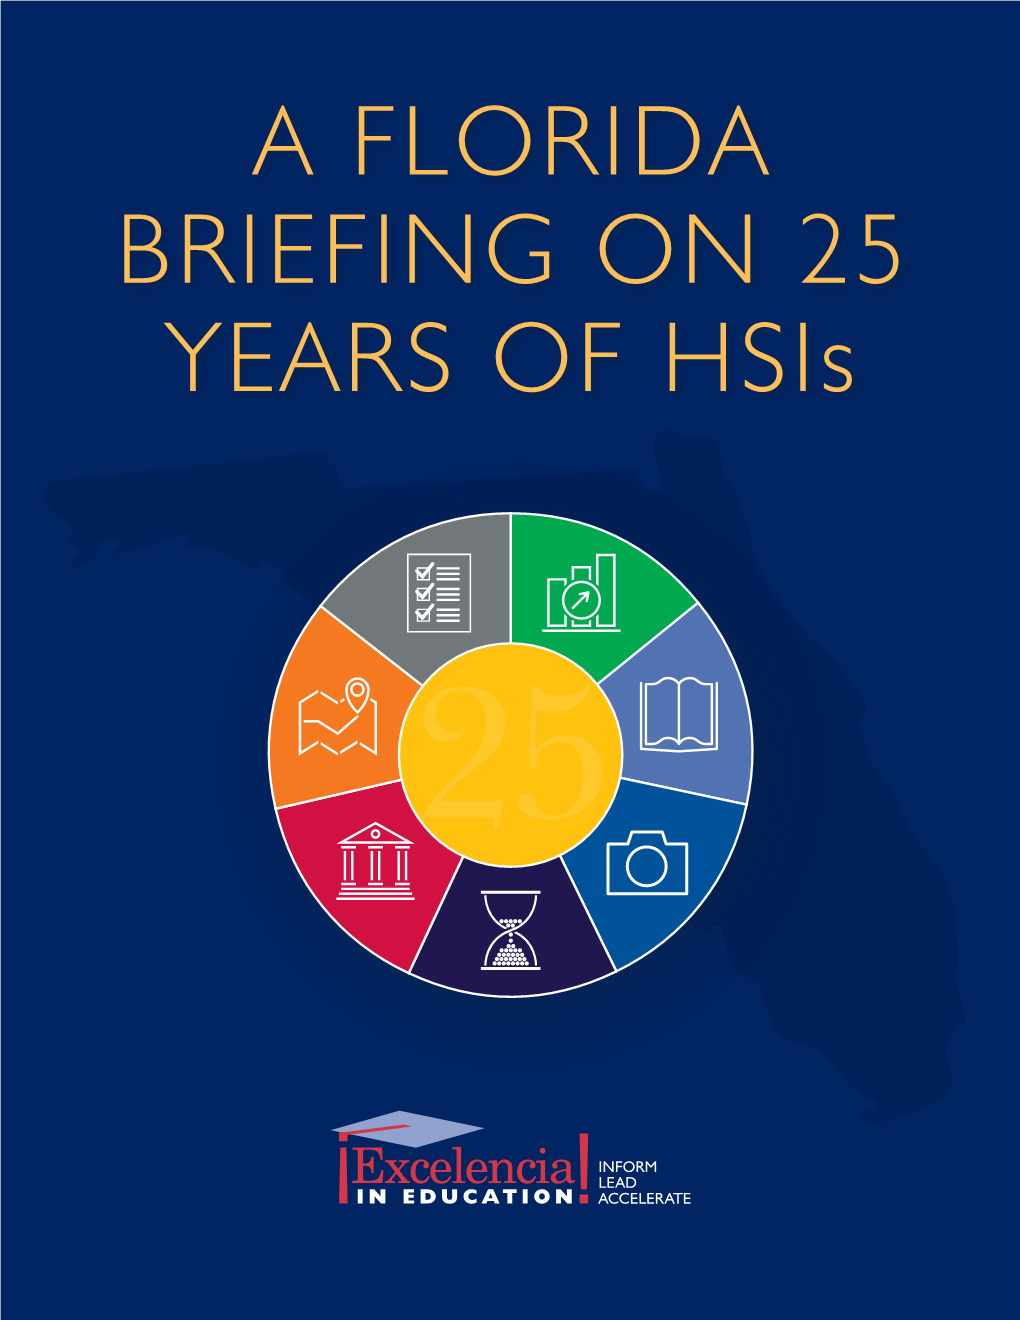 A FLORIDA BRIEFING on 25 YEARS of Hsis Leadership for Latino Student Success in Higher Education 2021